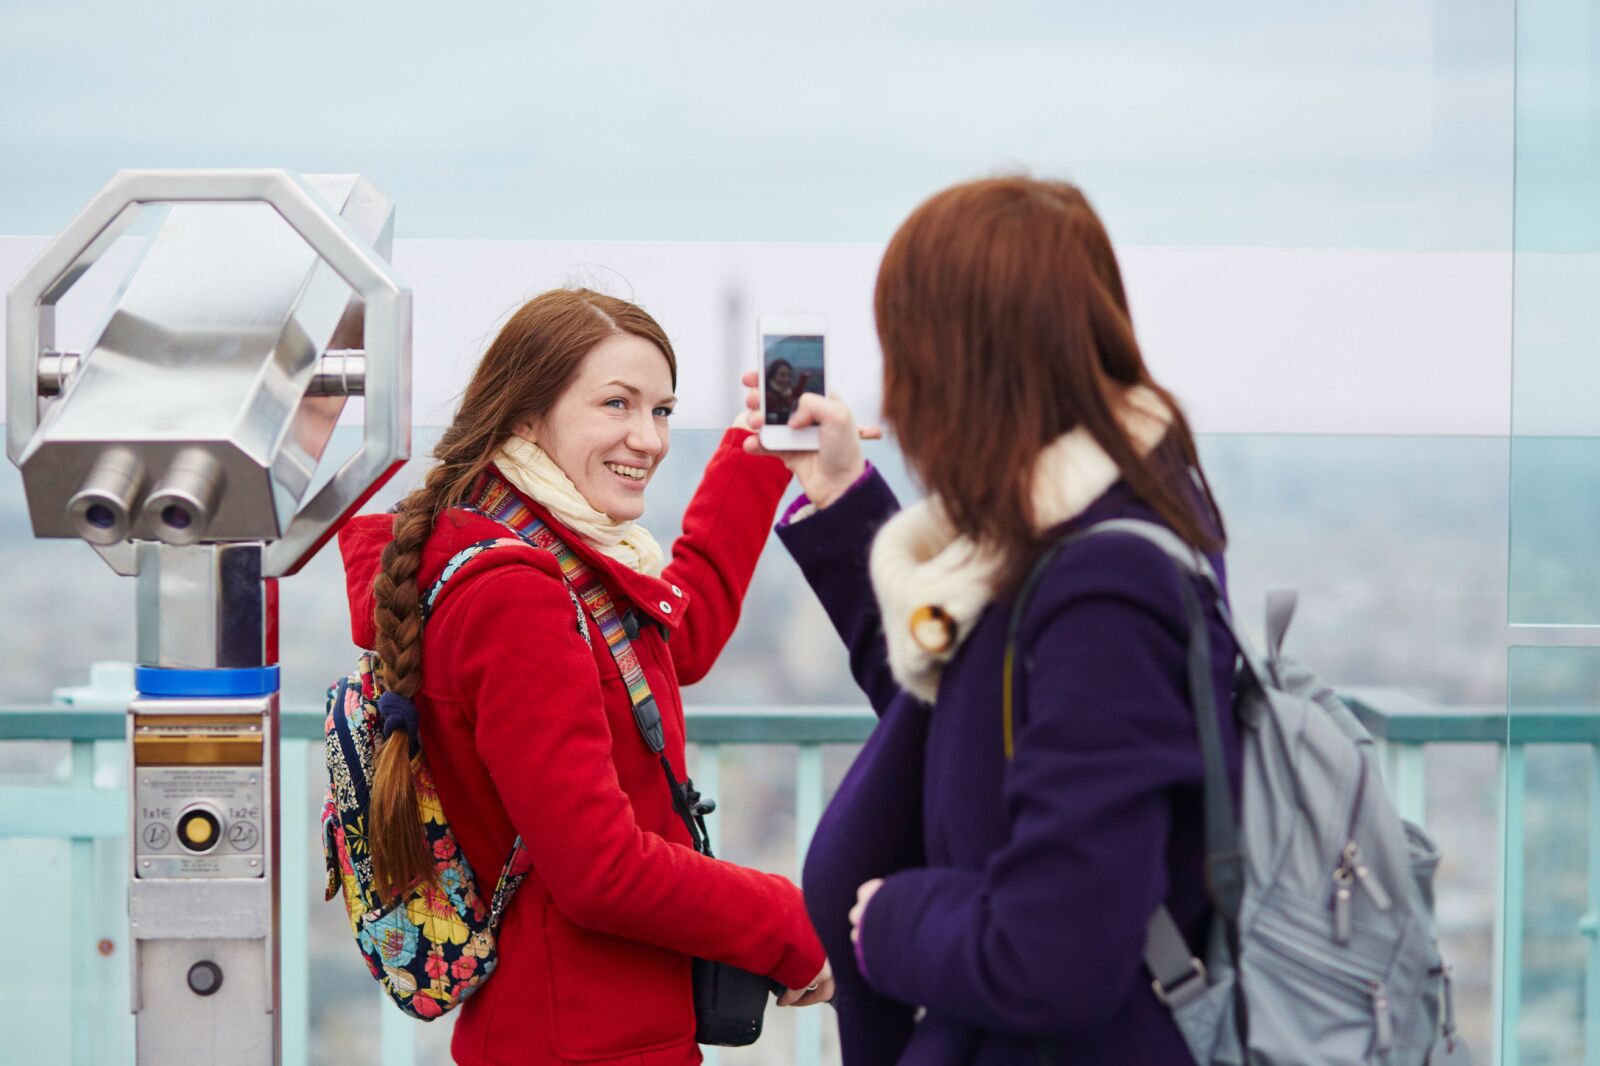 free walking tours - friends taking photos for each other on observation deck